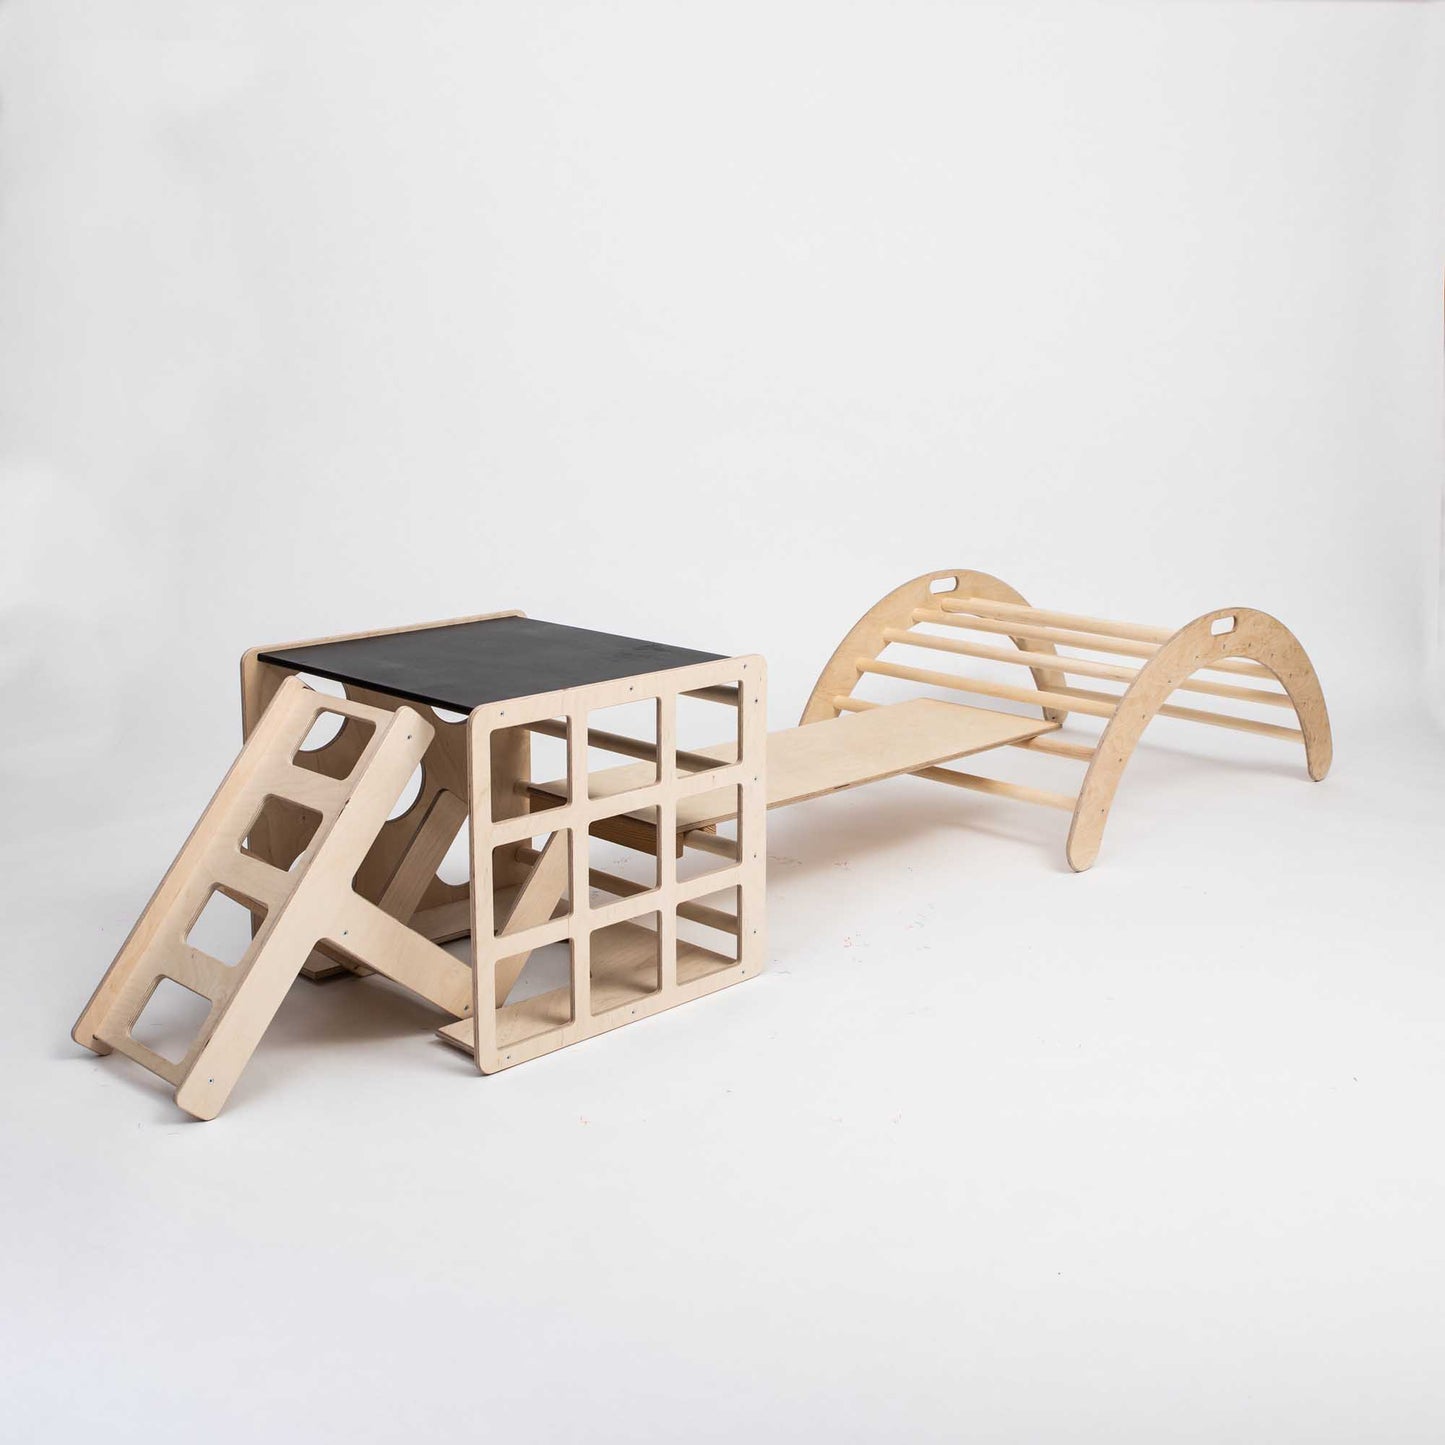 A Sweet Home From Wood wooden table with a Climbing arch + Transformable climbing cube / table and chair + a ramp on it.